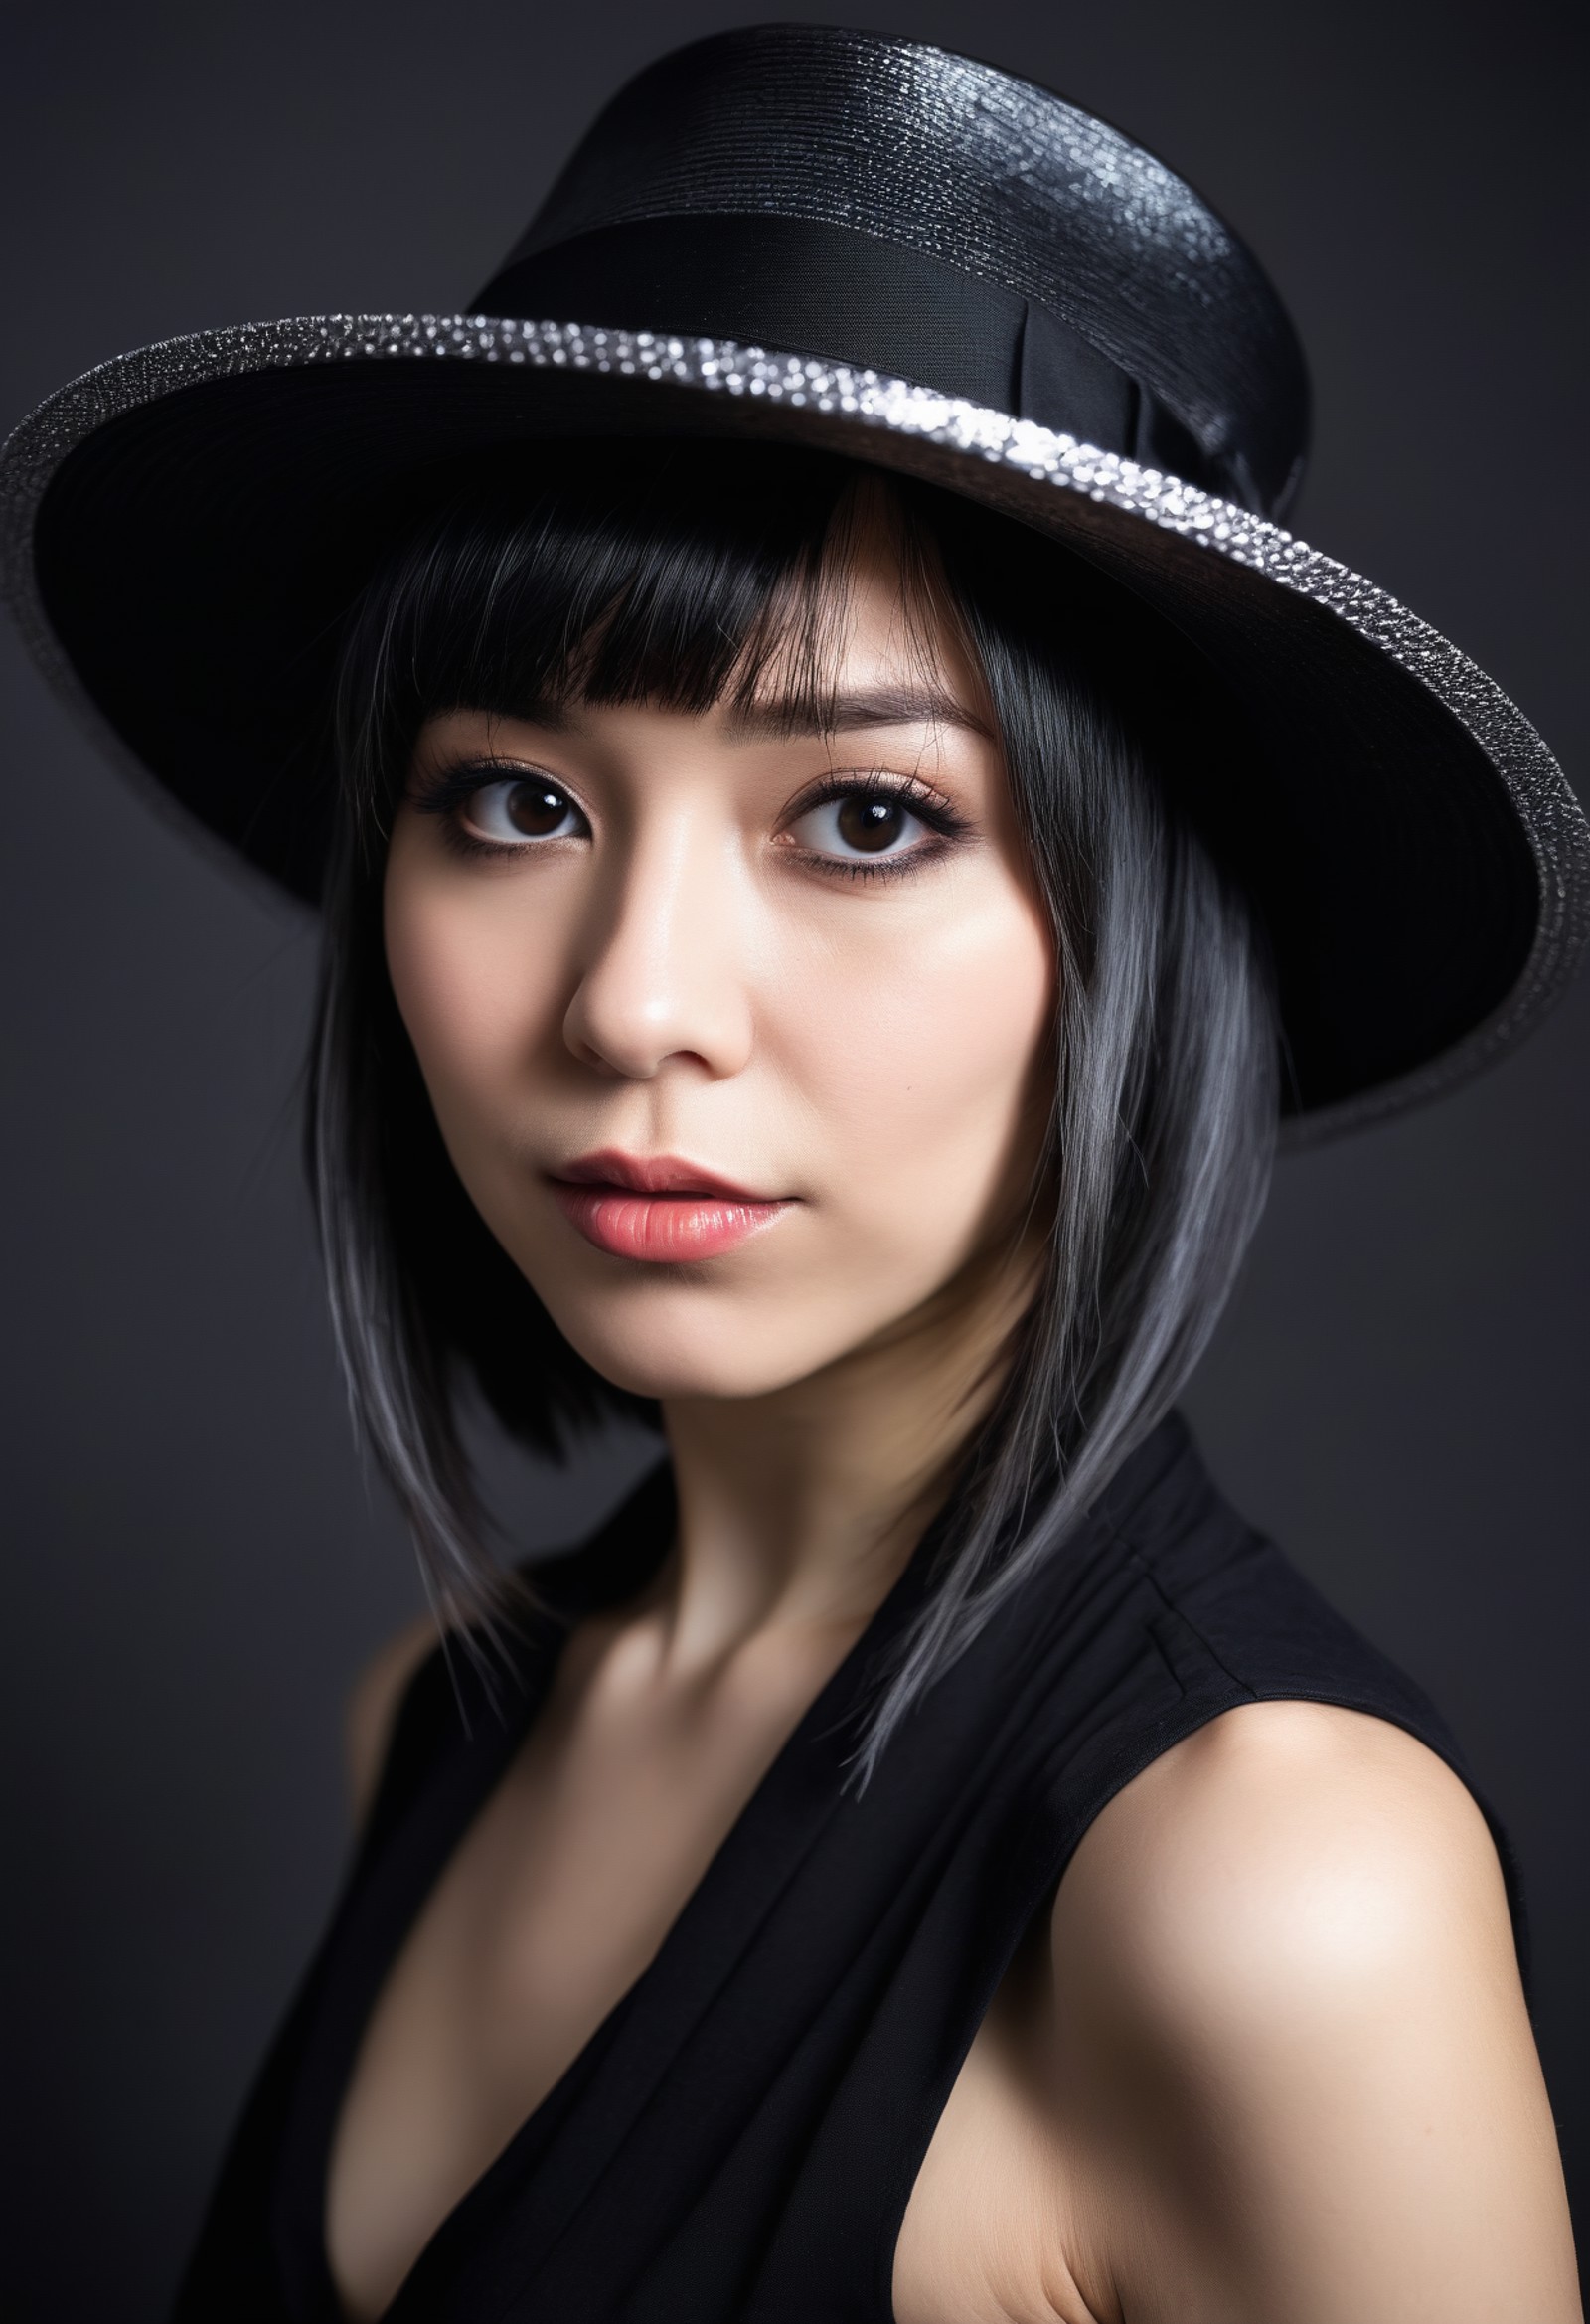 00105-A woman wearing a hat poses for a picture, in the style of oshare kei, black, wide lens, shiny_ glossy, solapunk, dark silver, r.png